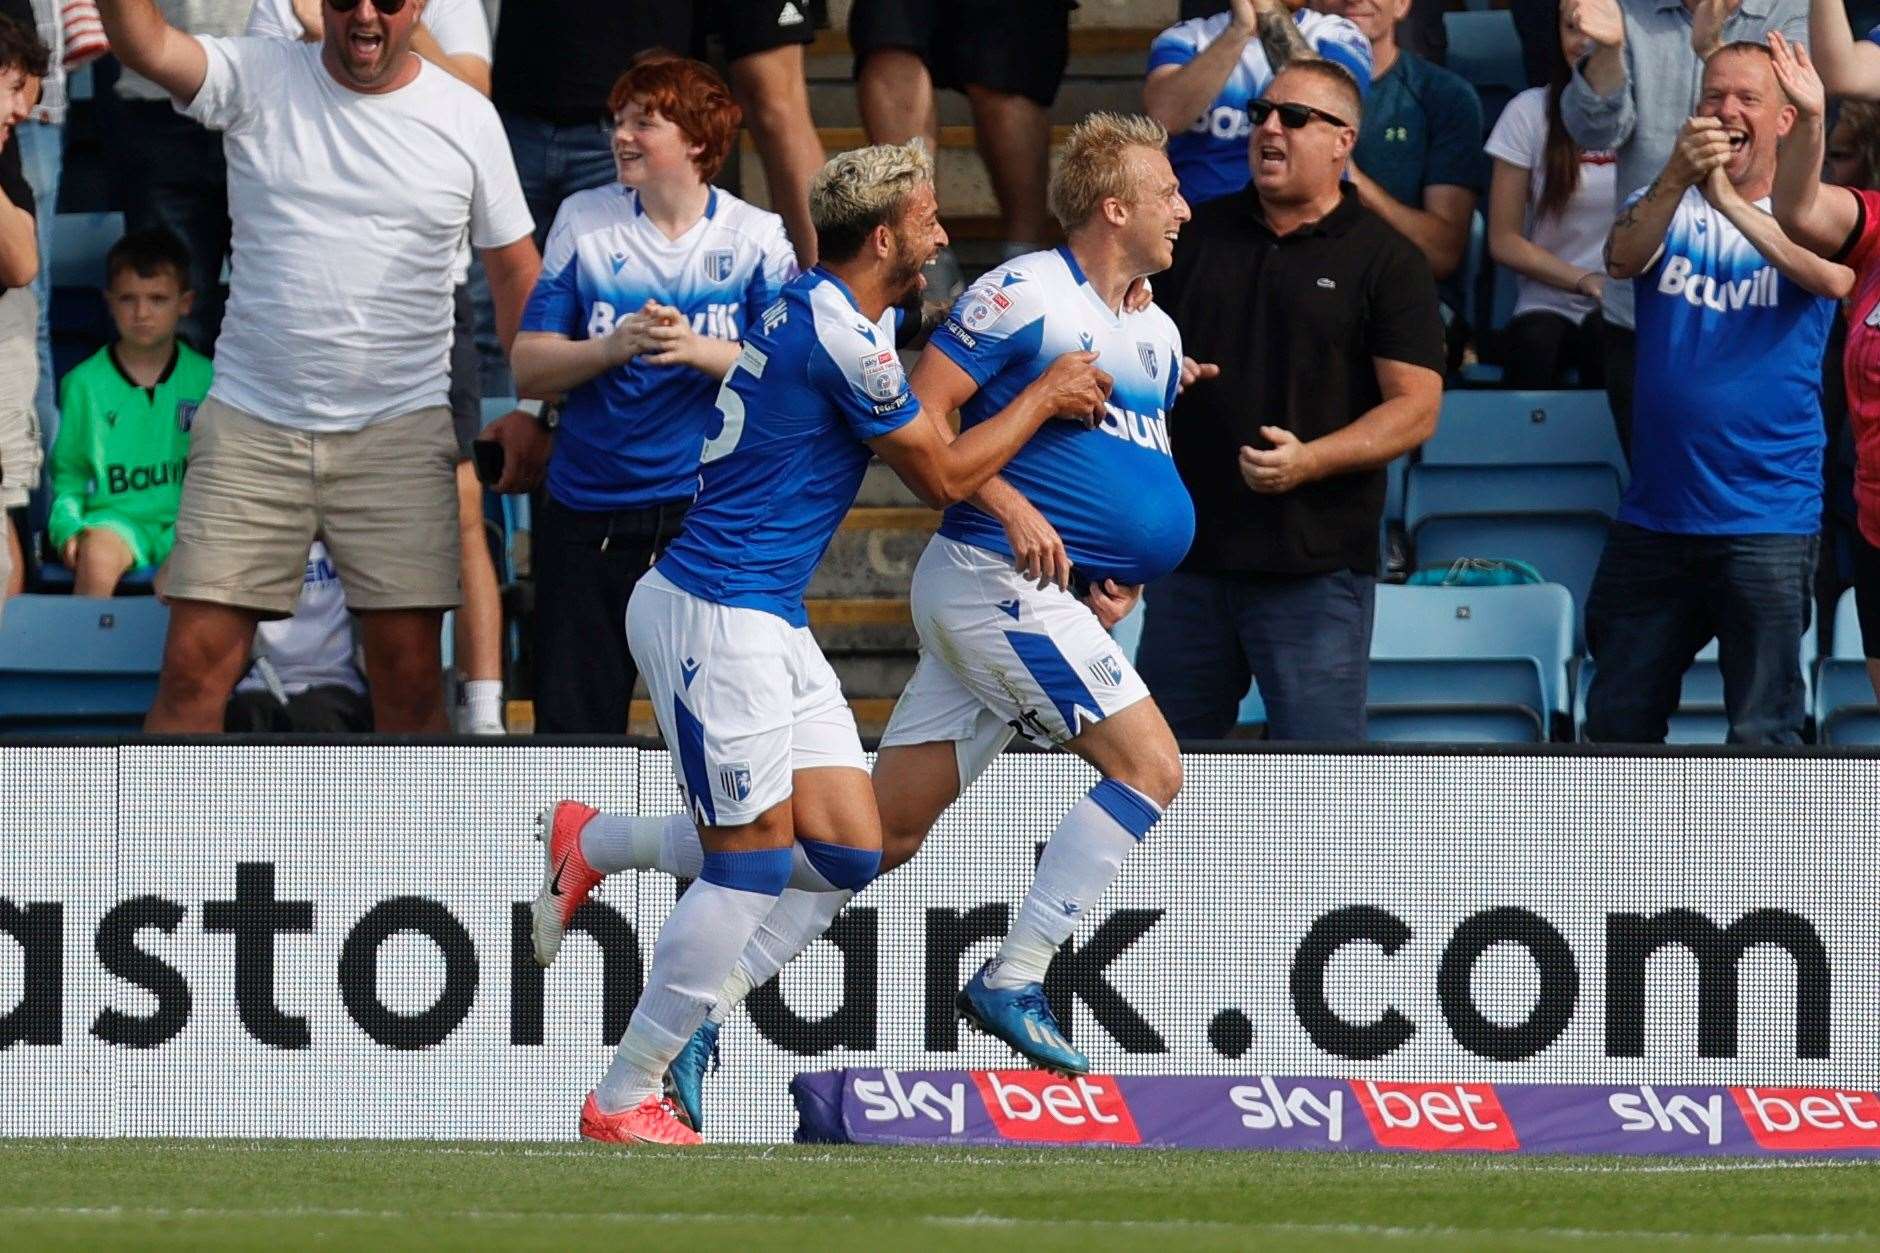 George Lapslie and Macauley Bonne celebrate the opening goal for Gillingham against Morecambe Picture: @Julian_KPI